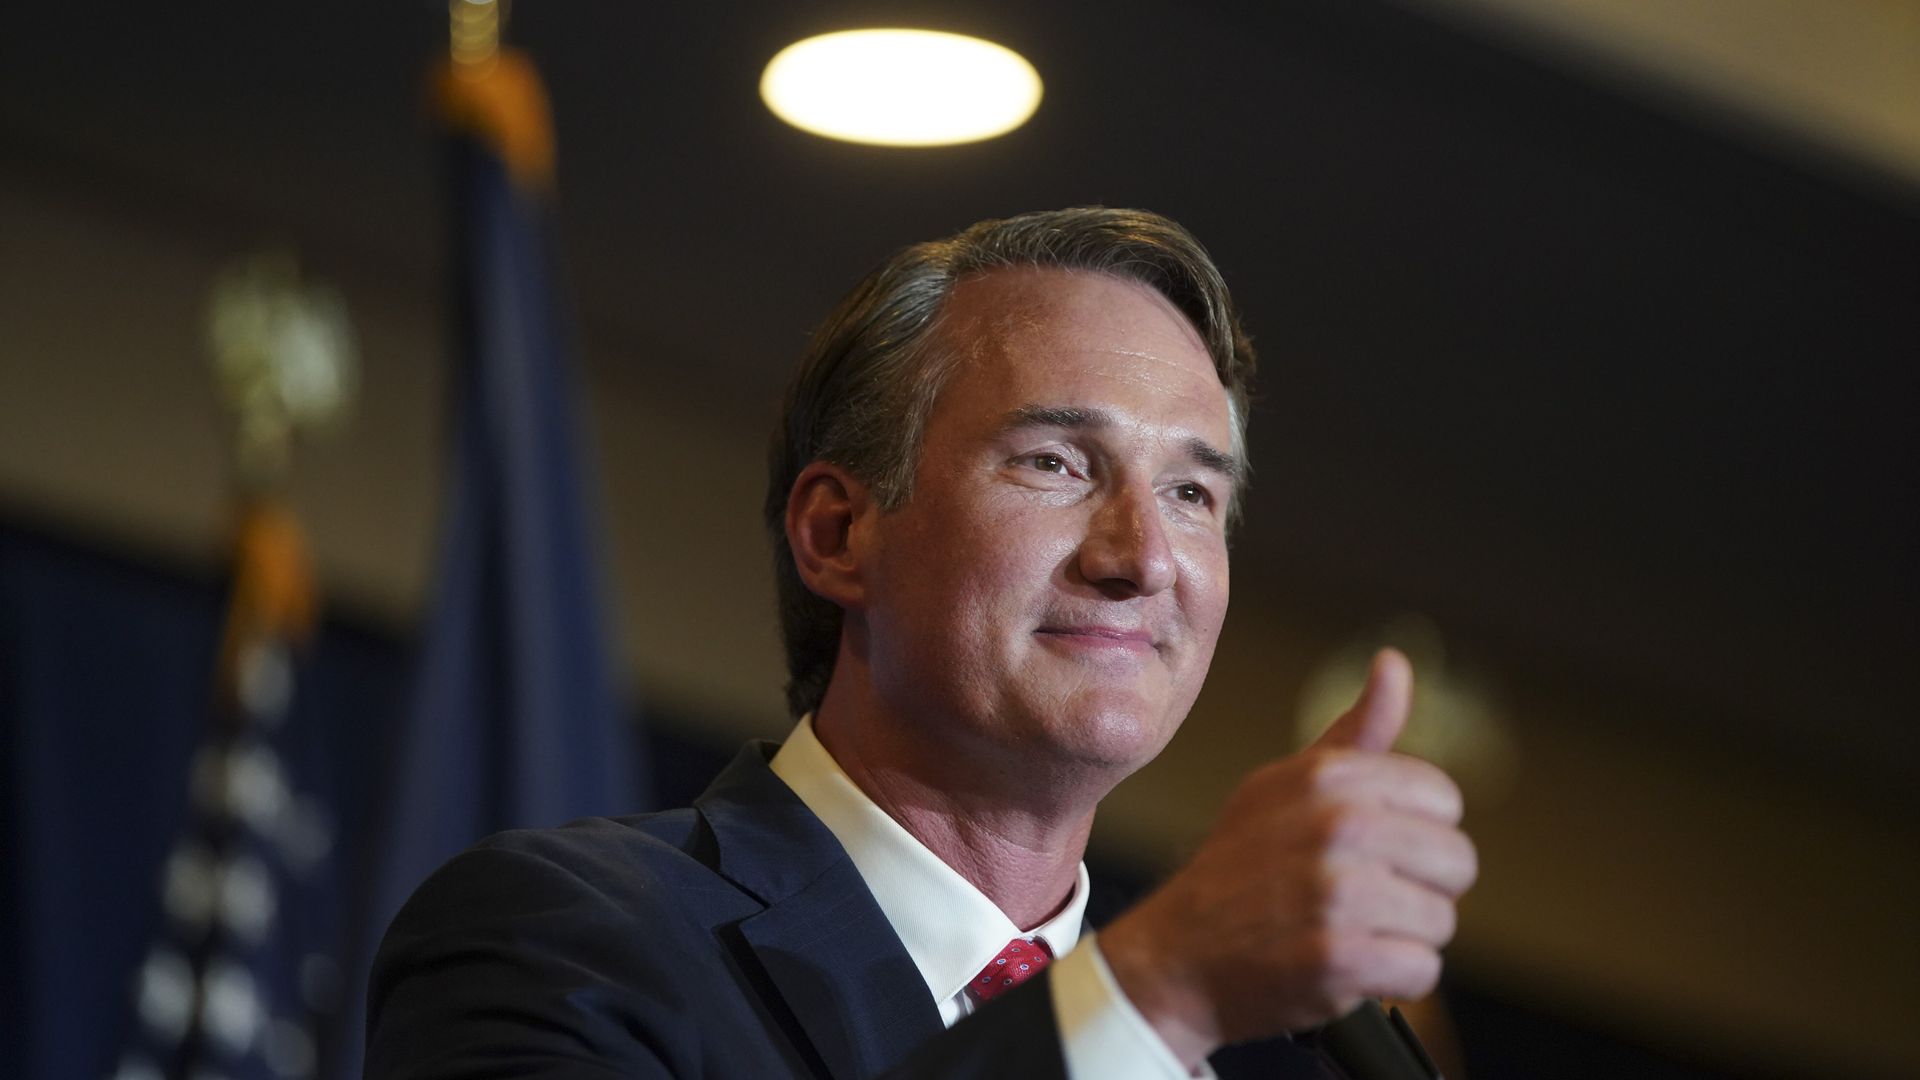  Glenn Youngkin, governor-elect of Virginia, gives a thumbs-up after speaking during an election night event in Chantilly, Virginia, U.S., on Wednesday. 